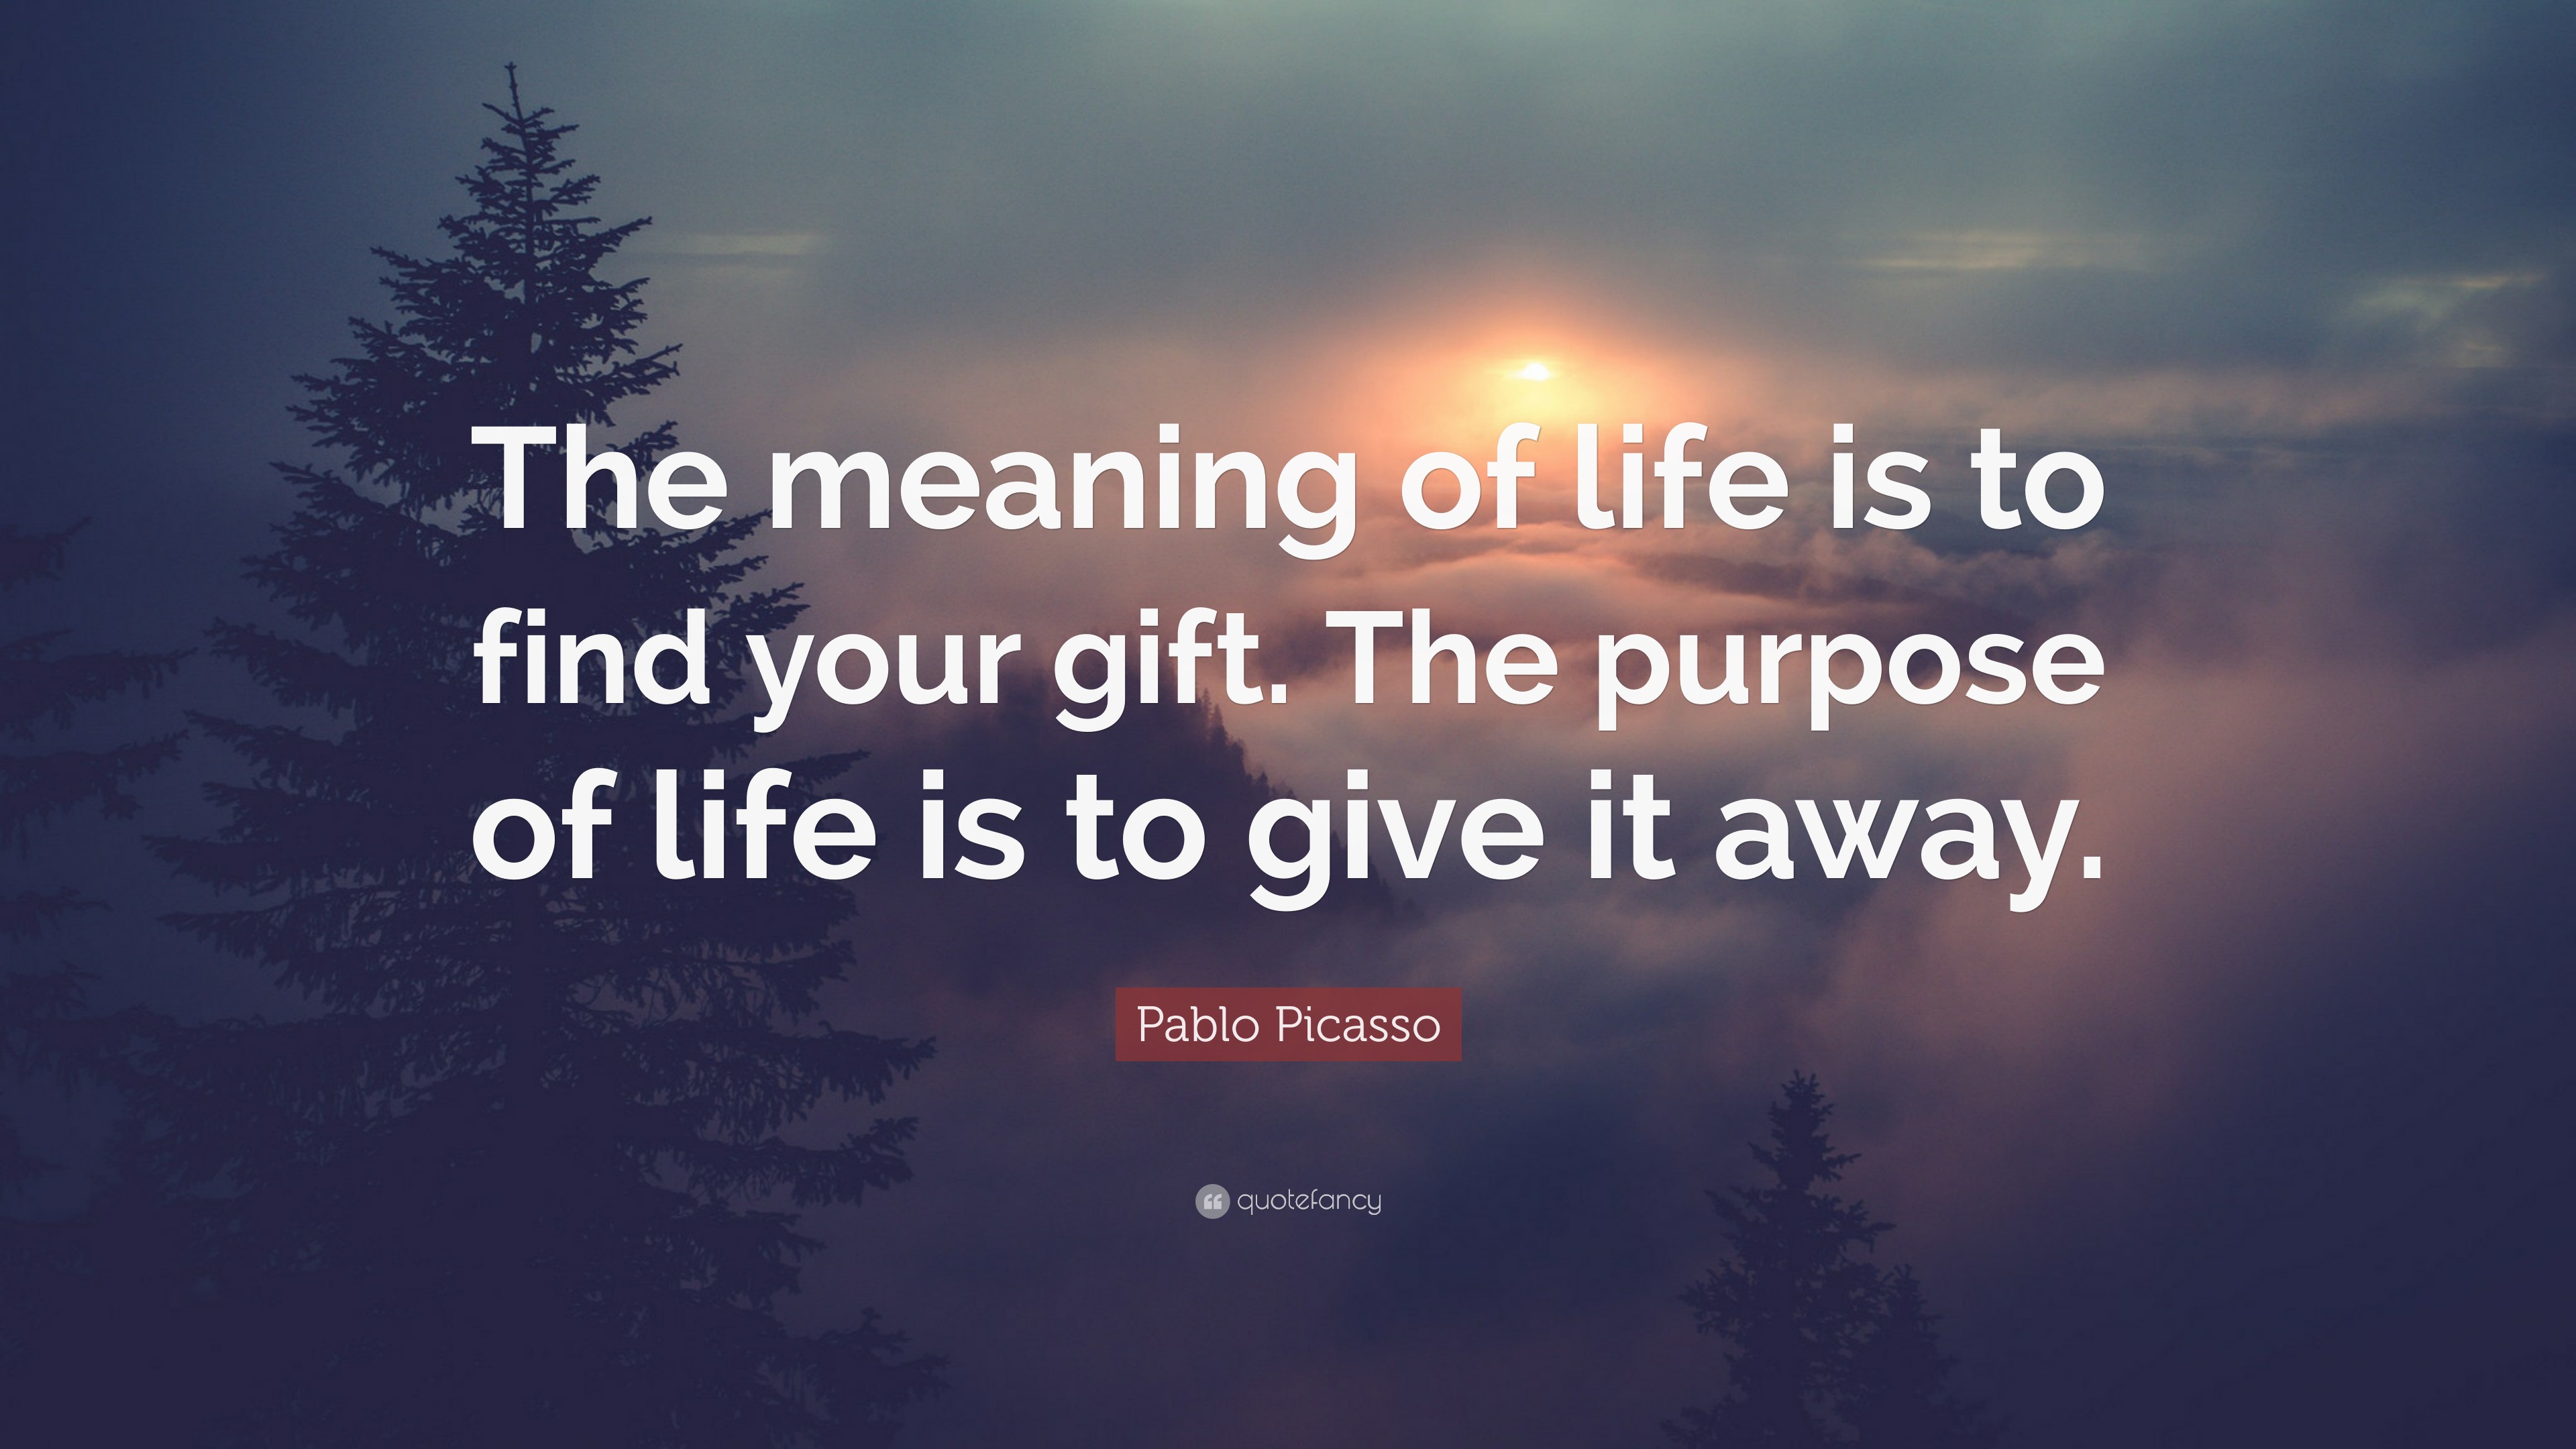 Pablo Picasso Quote: "The meaning of life is to find your gift. The purpose of life is to give ...